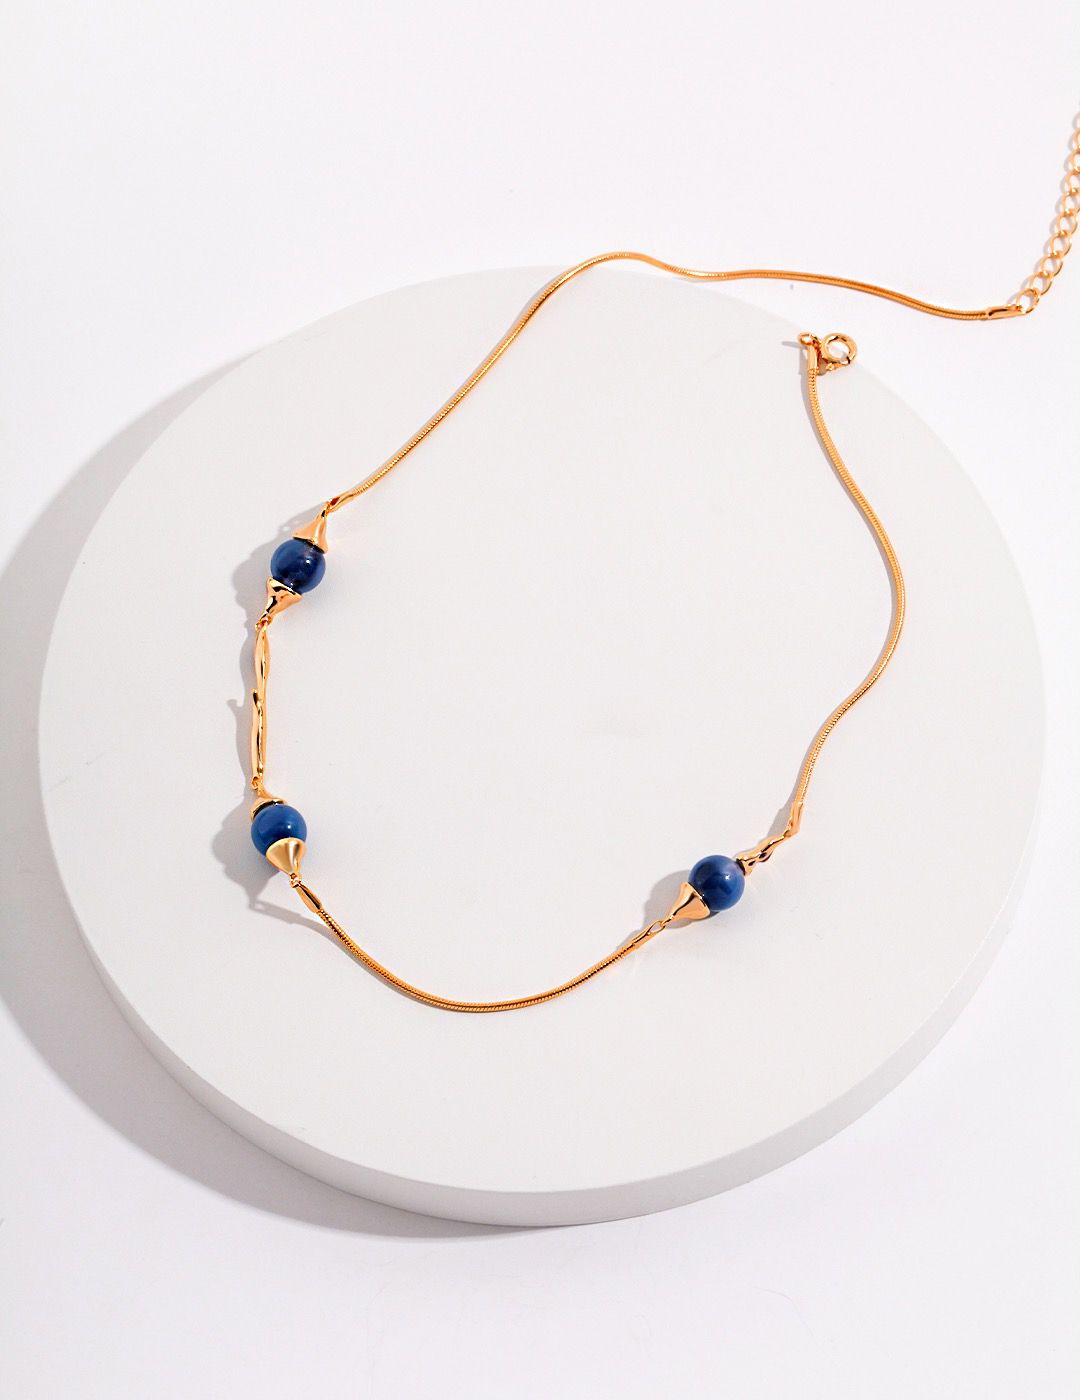 Blue agate collar necklace with gold chain